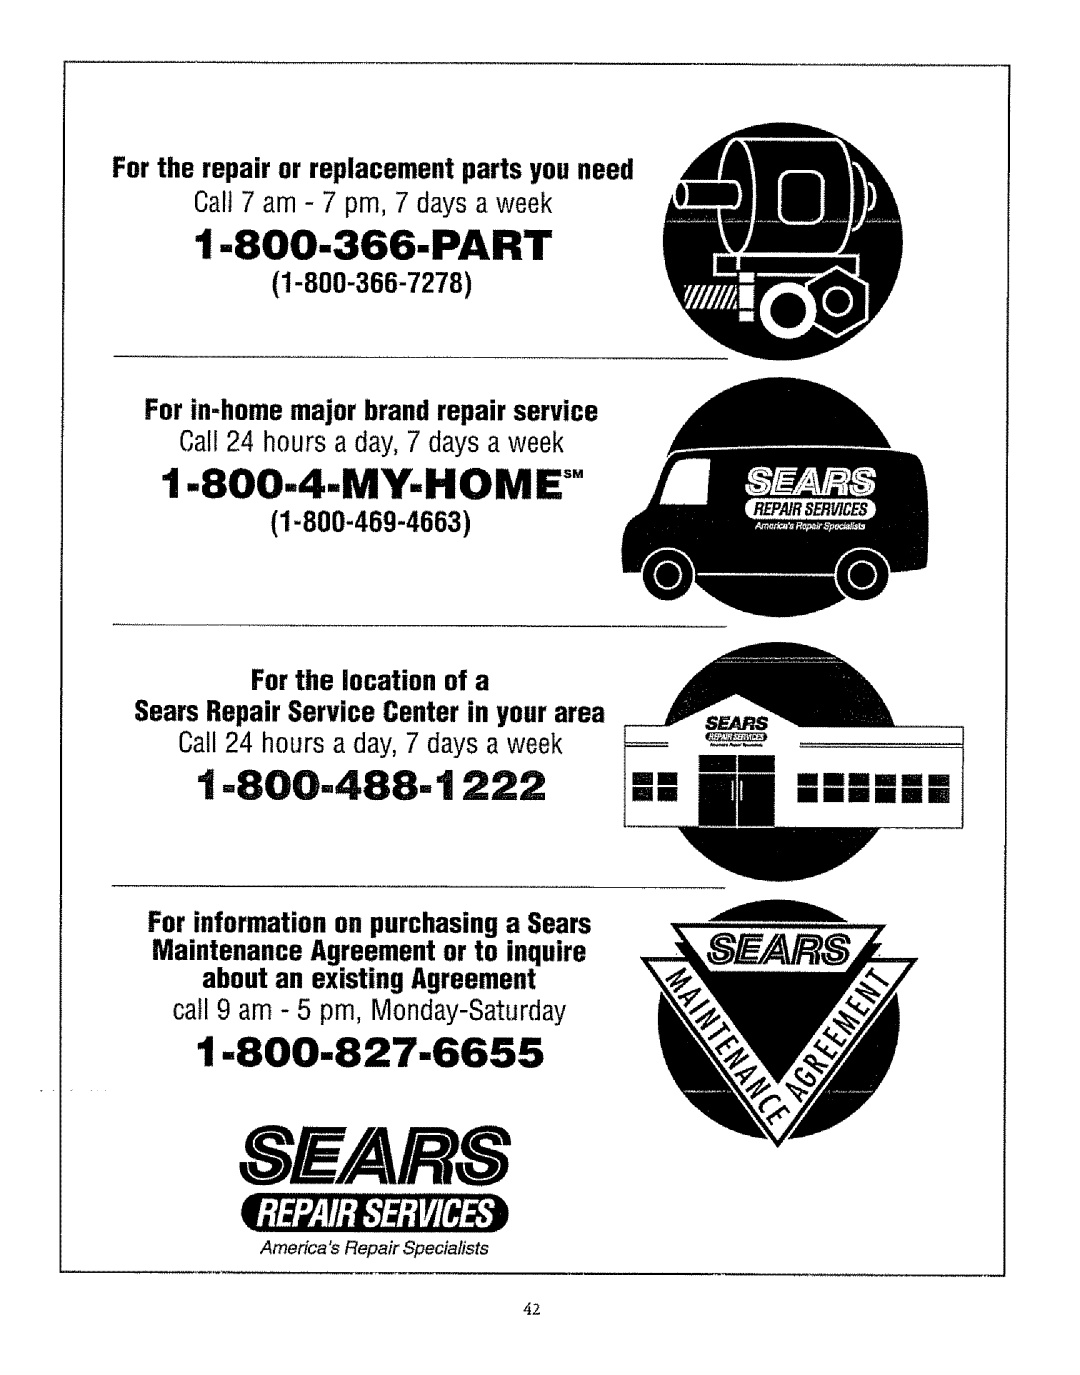 Sears 61118, 71751, 71068, 71351, 71168, 71161, 71668, 71061, 71661, 71358, 71665, 61011 t -800-488-t, Part, 1-800-827-6655, My-Home 